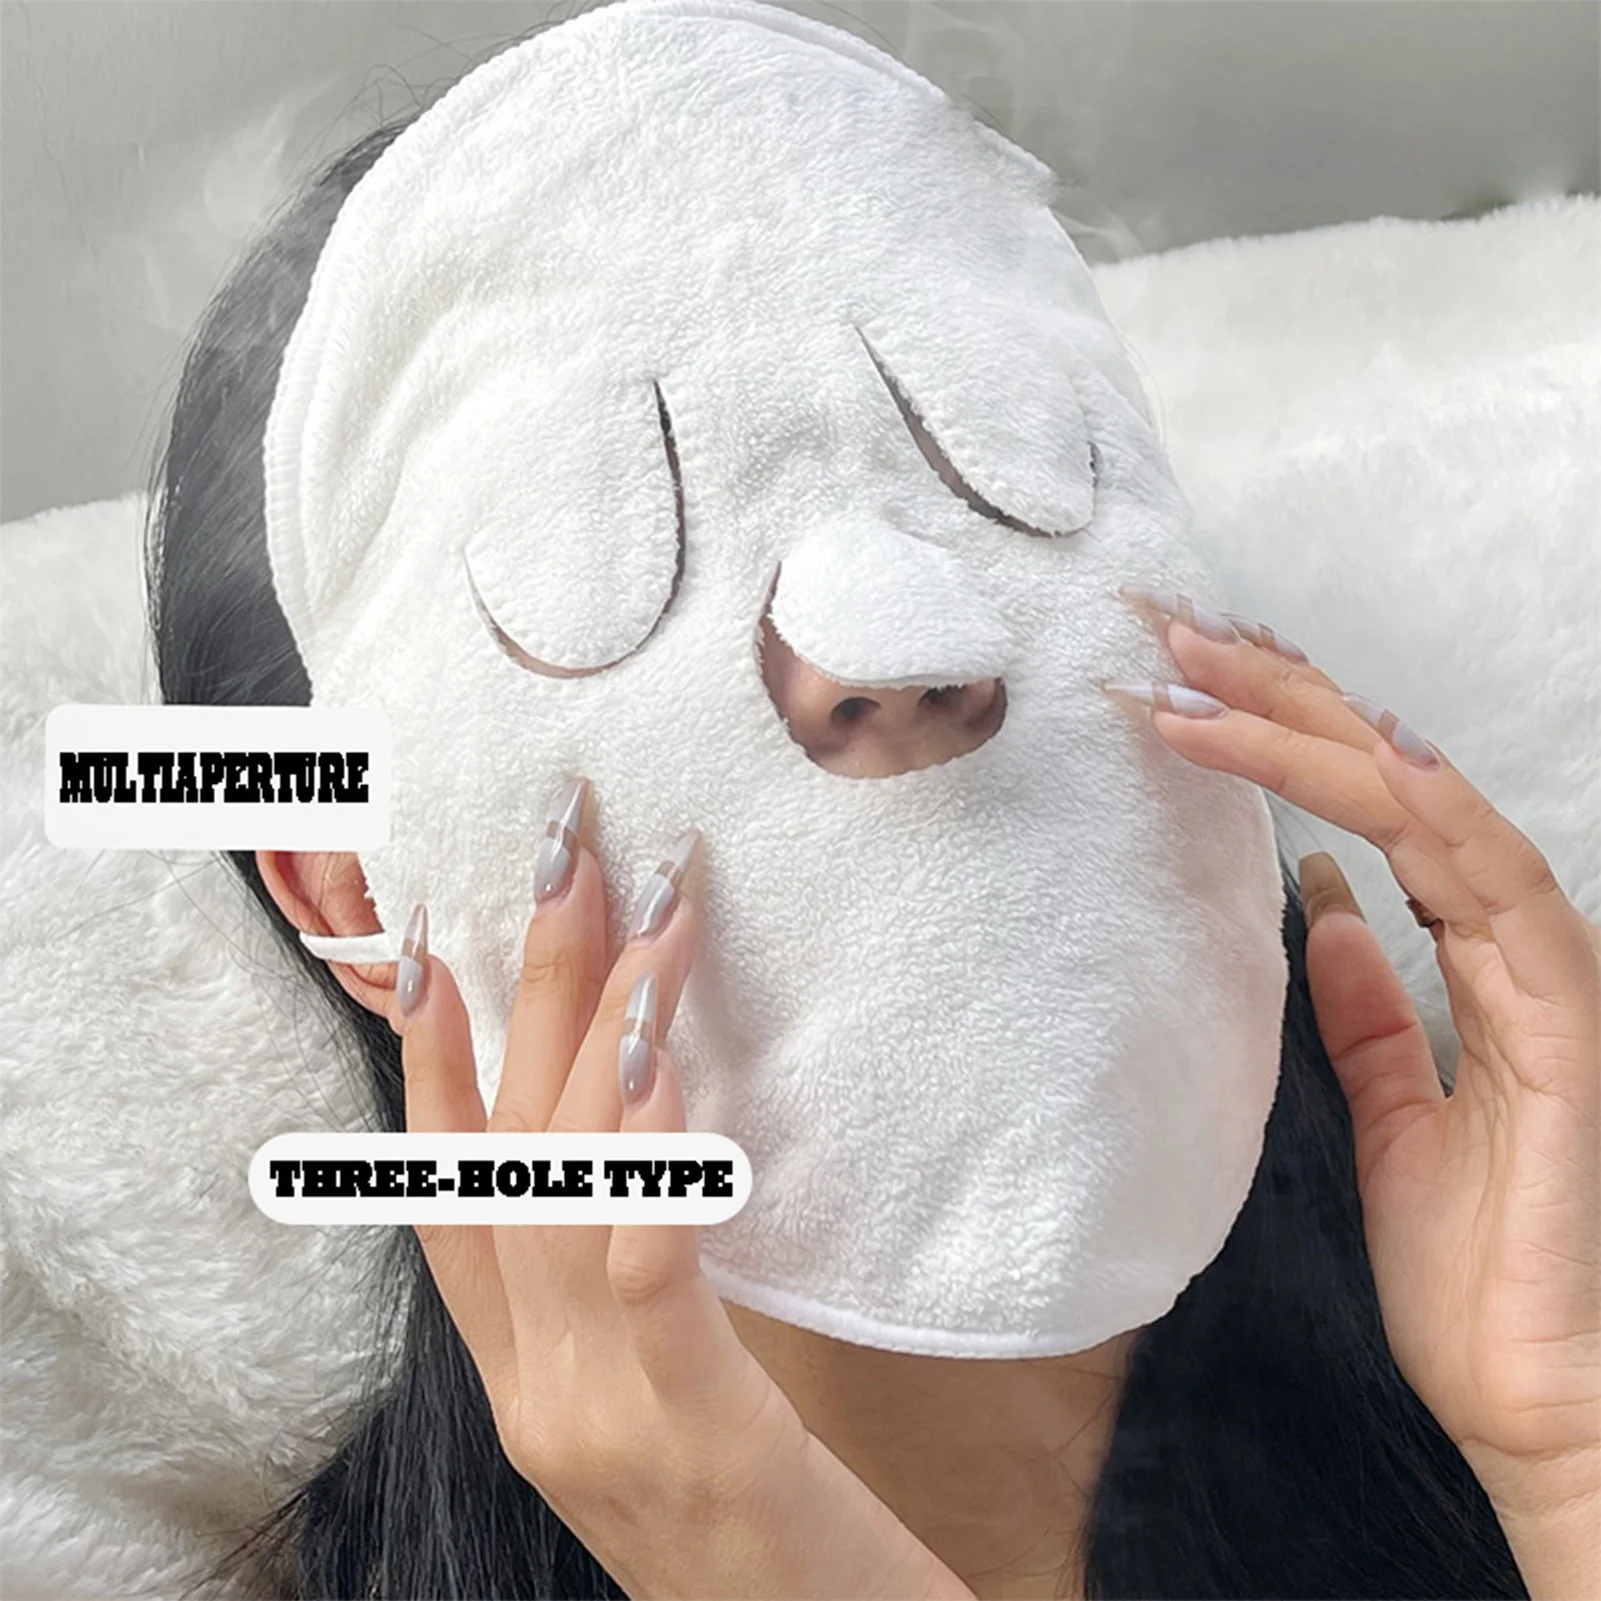 Hot/Cold Compress Ear-Mounted Towel Skin Care Moisturizing Mask Towel Skin Care Products купальник женский Beach Towel Playa winter intelligent electric heating scarf anti cold neck automatic heating warming hot compress electric heating towel